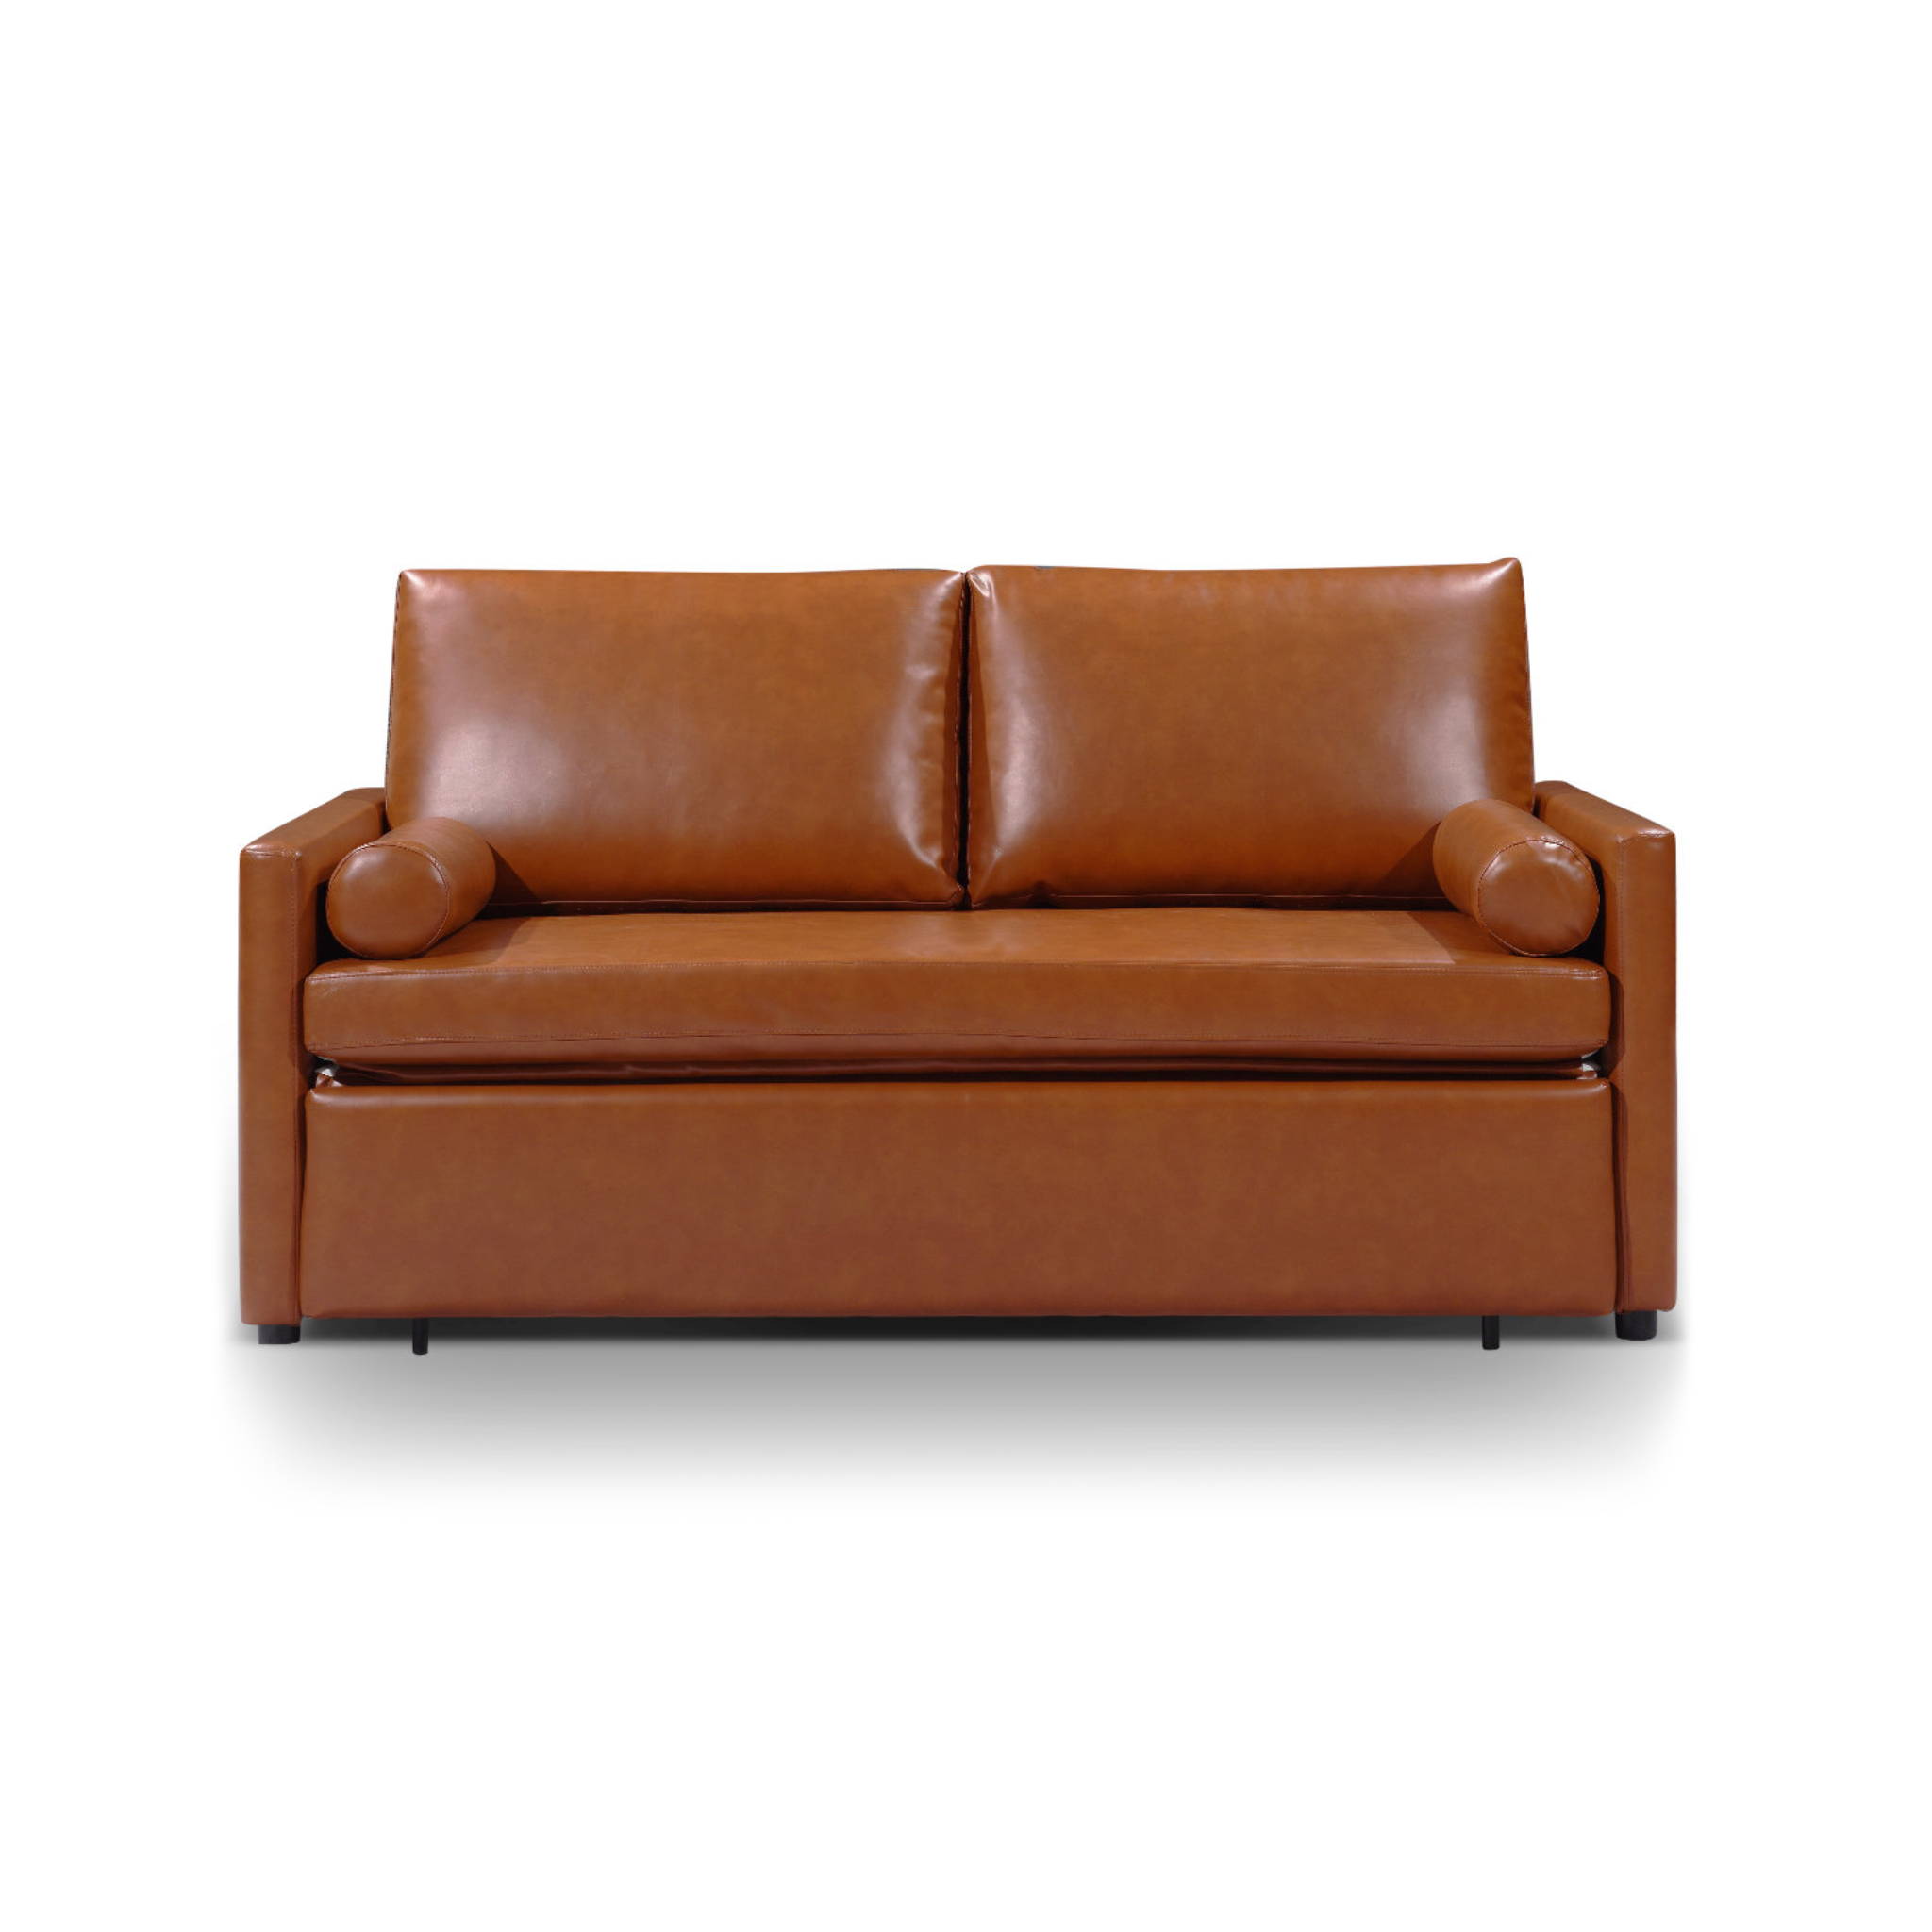 Harmony Sofa Bed Queen Eco Leather, Leather Couch Sleeper Bed